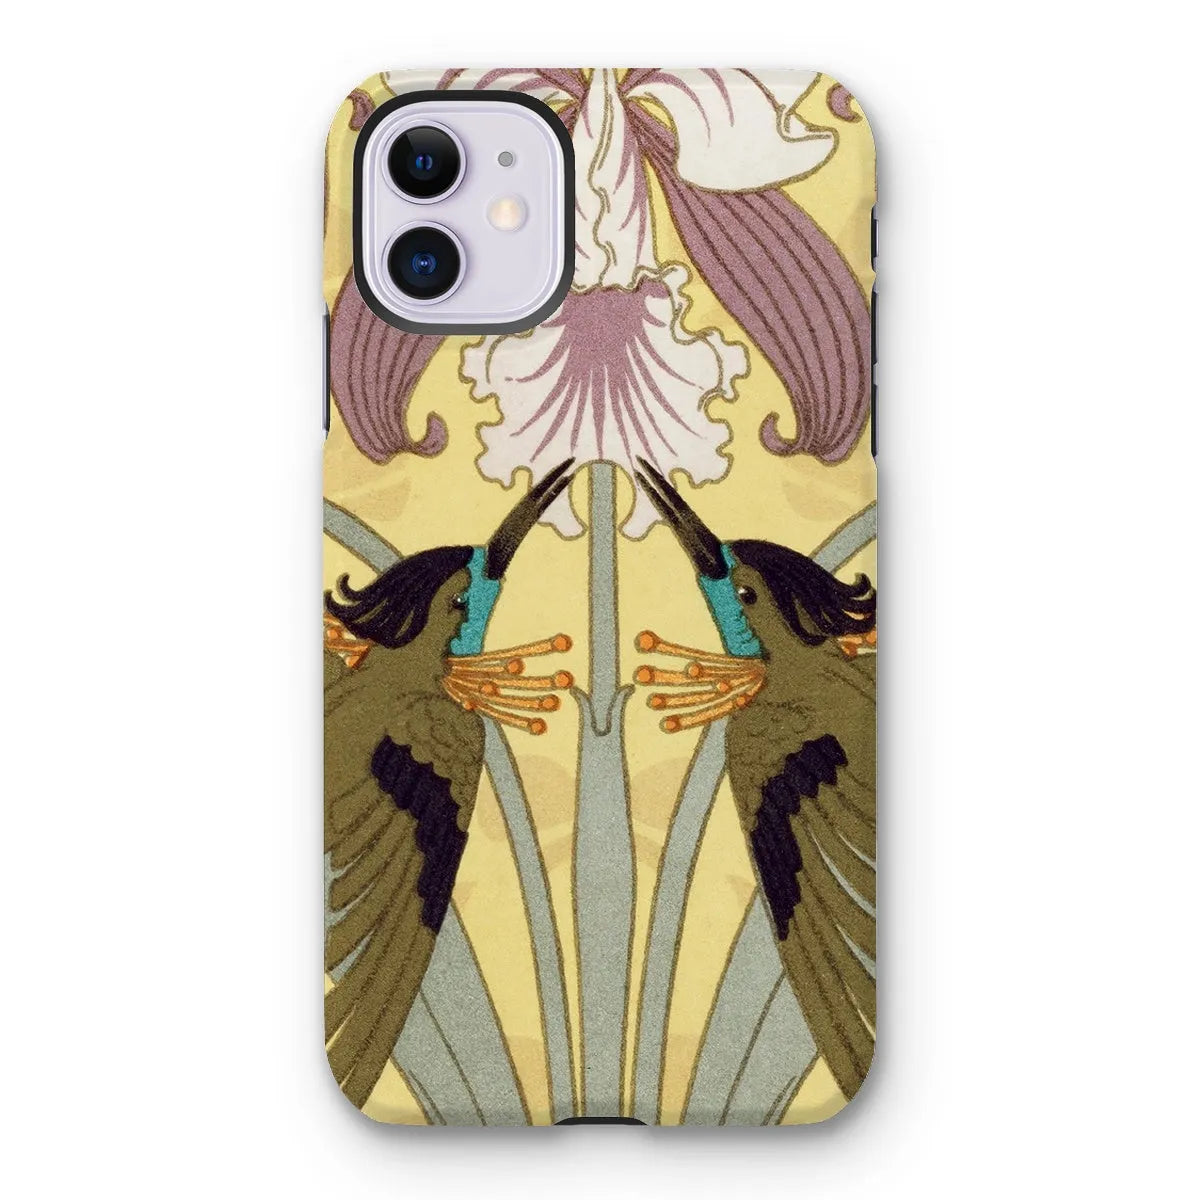 Hummingbirds And Orchids Phone Case - Maurice Pillard Verneuil - Iphone 11 / Matte - Mobile Phone Cases - Aesthetic Art